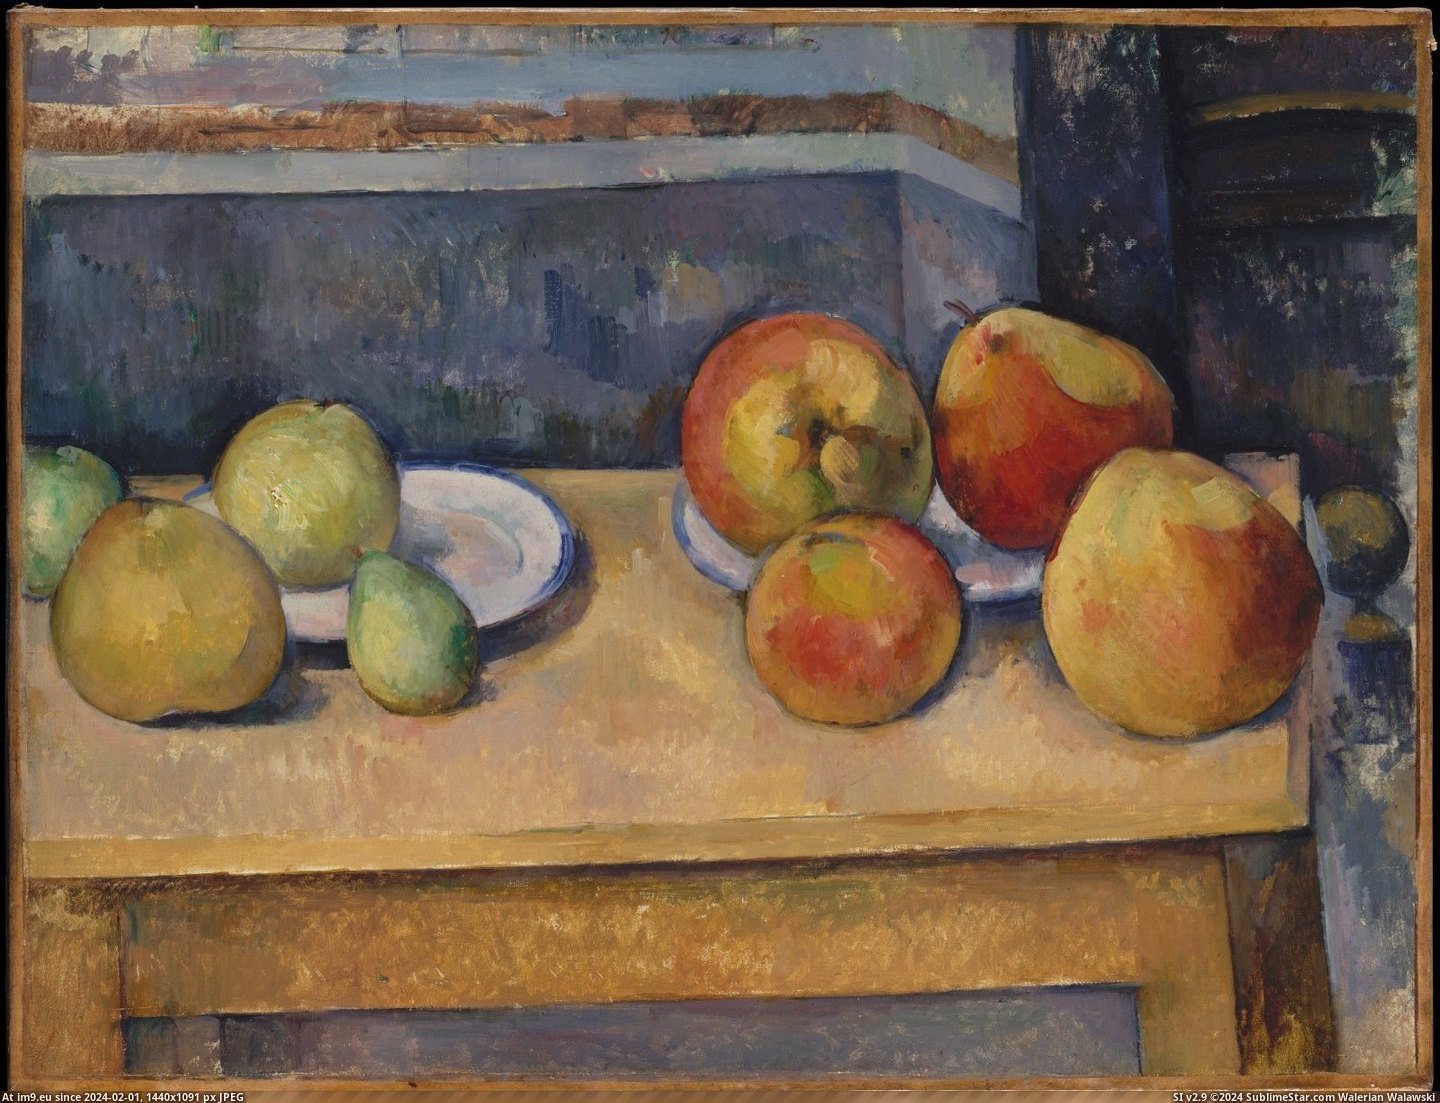 Paul Cézanne - Still Life with Apples and Pears (ca. 1891-92) (in Metropolitan Museum Of Art - European Paintings)